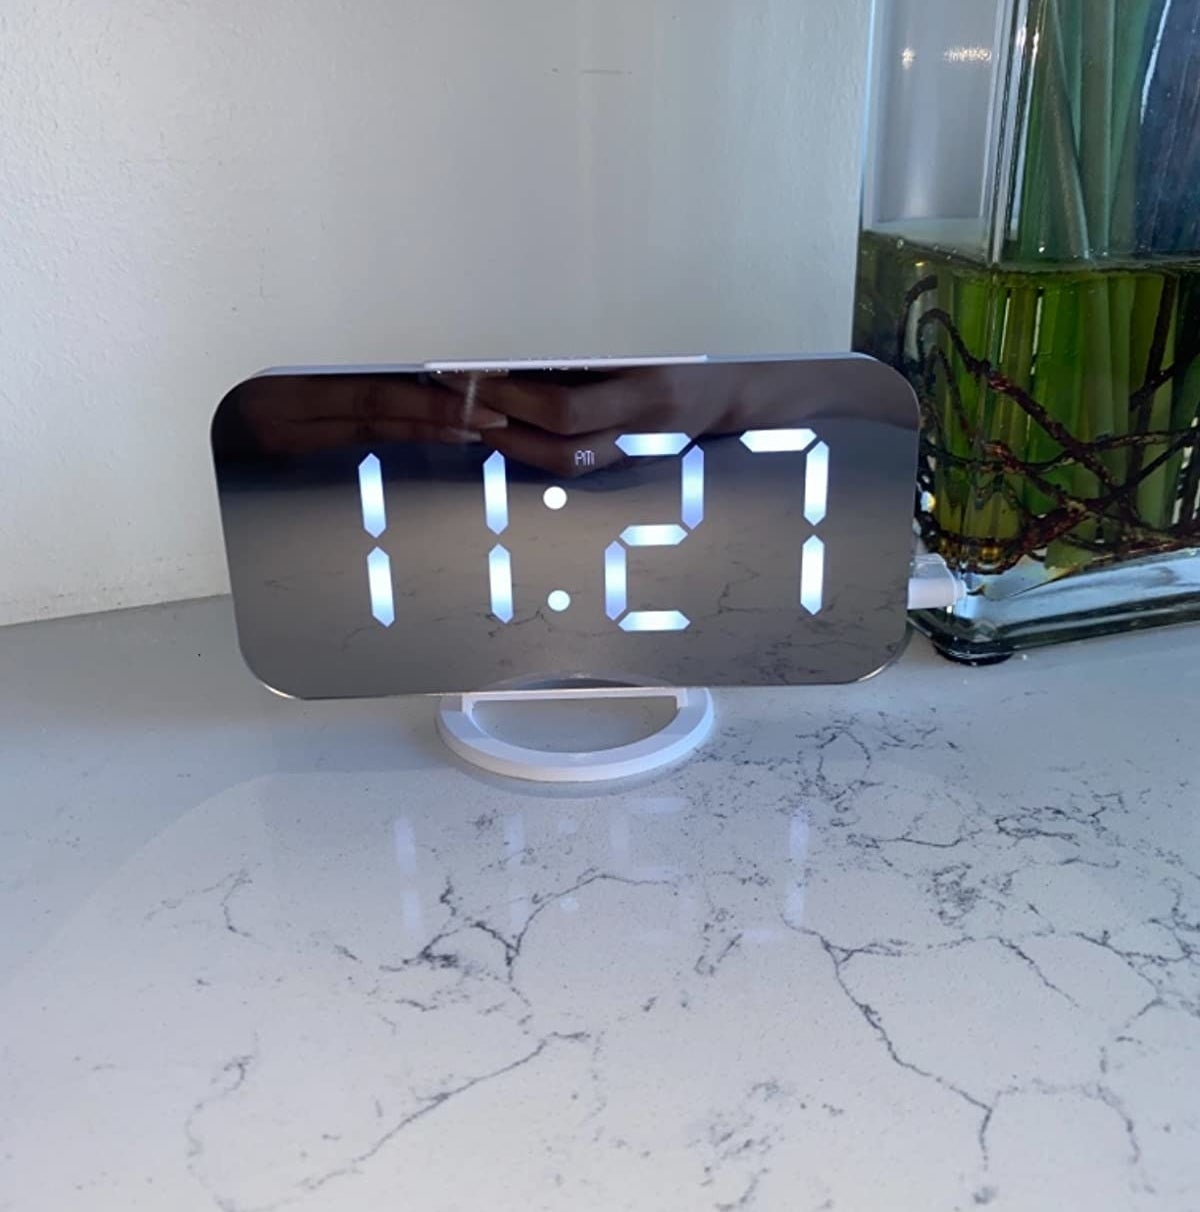 mirrored alarm clock on a marbled surface